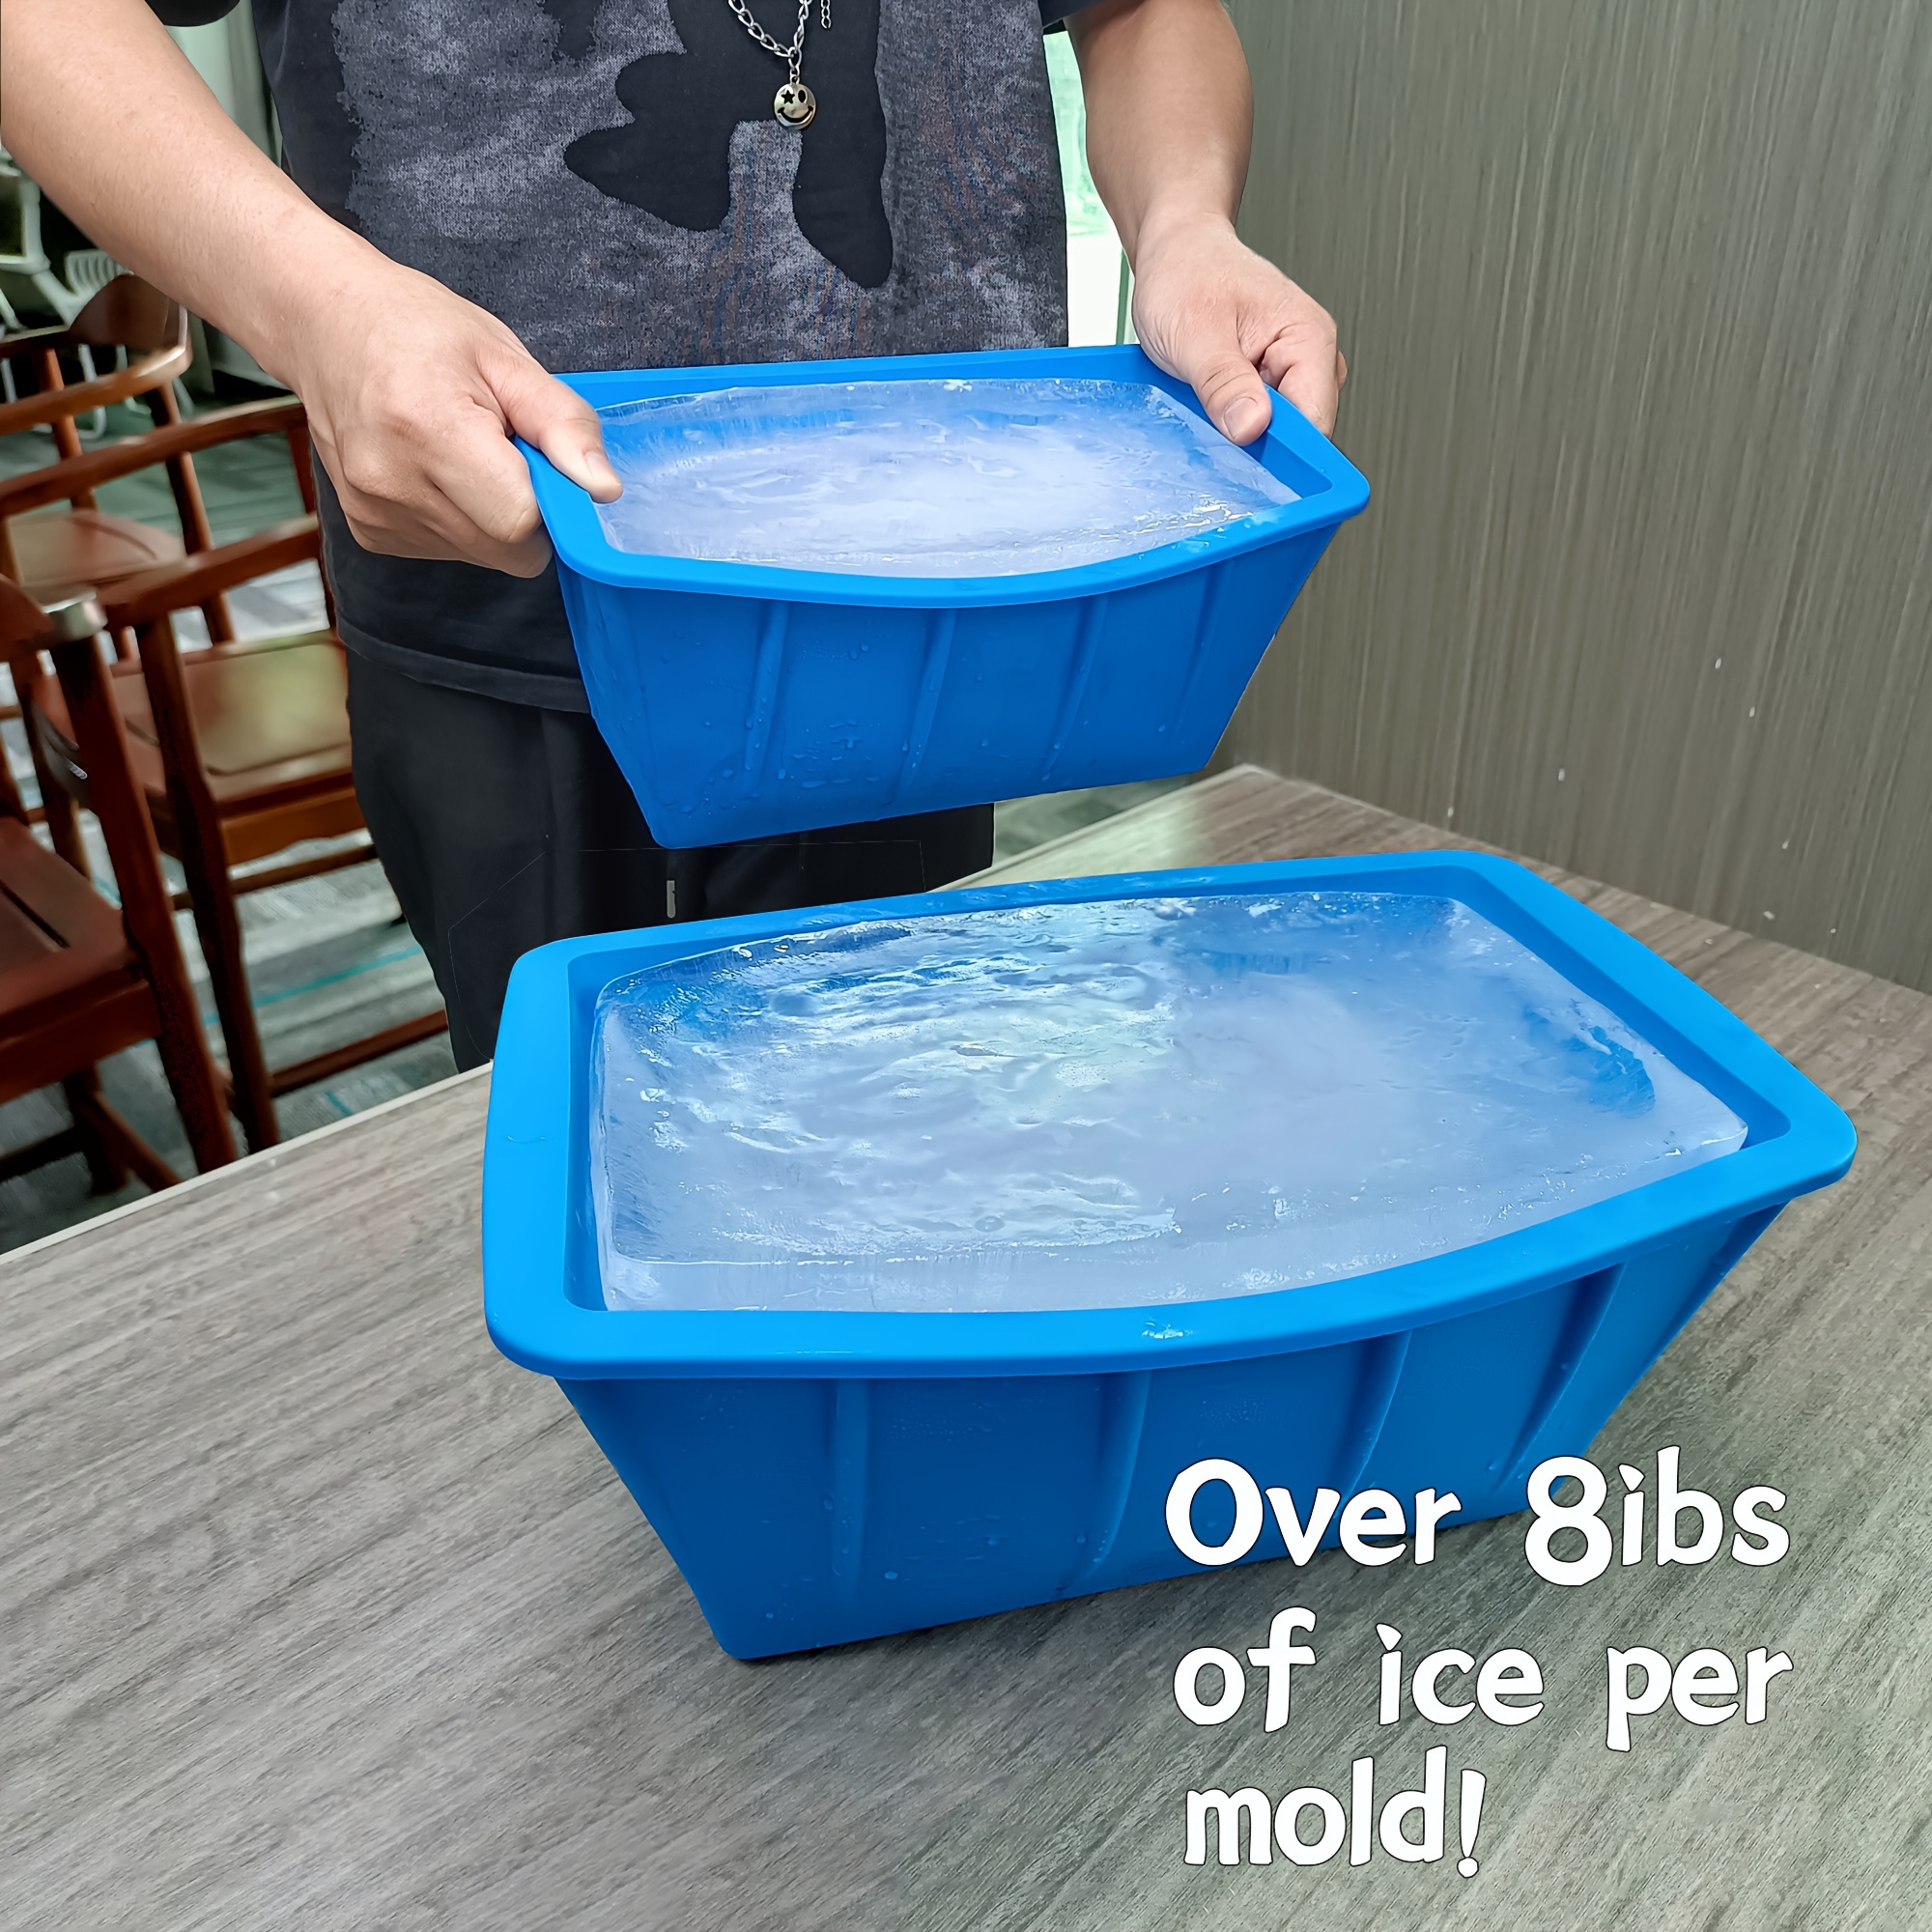 Ice Barrel Ice Block Mold (1 Mold) for Extra Large Ice Blocks (7 lbs) -  Large Ice Cubes for Freezer - Silicone Ice Mold with reinforced Steel